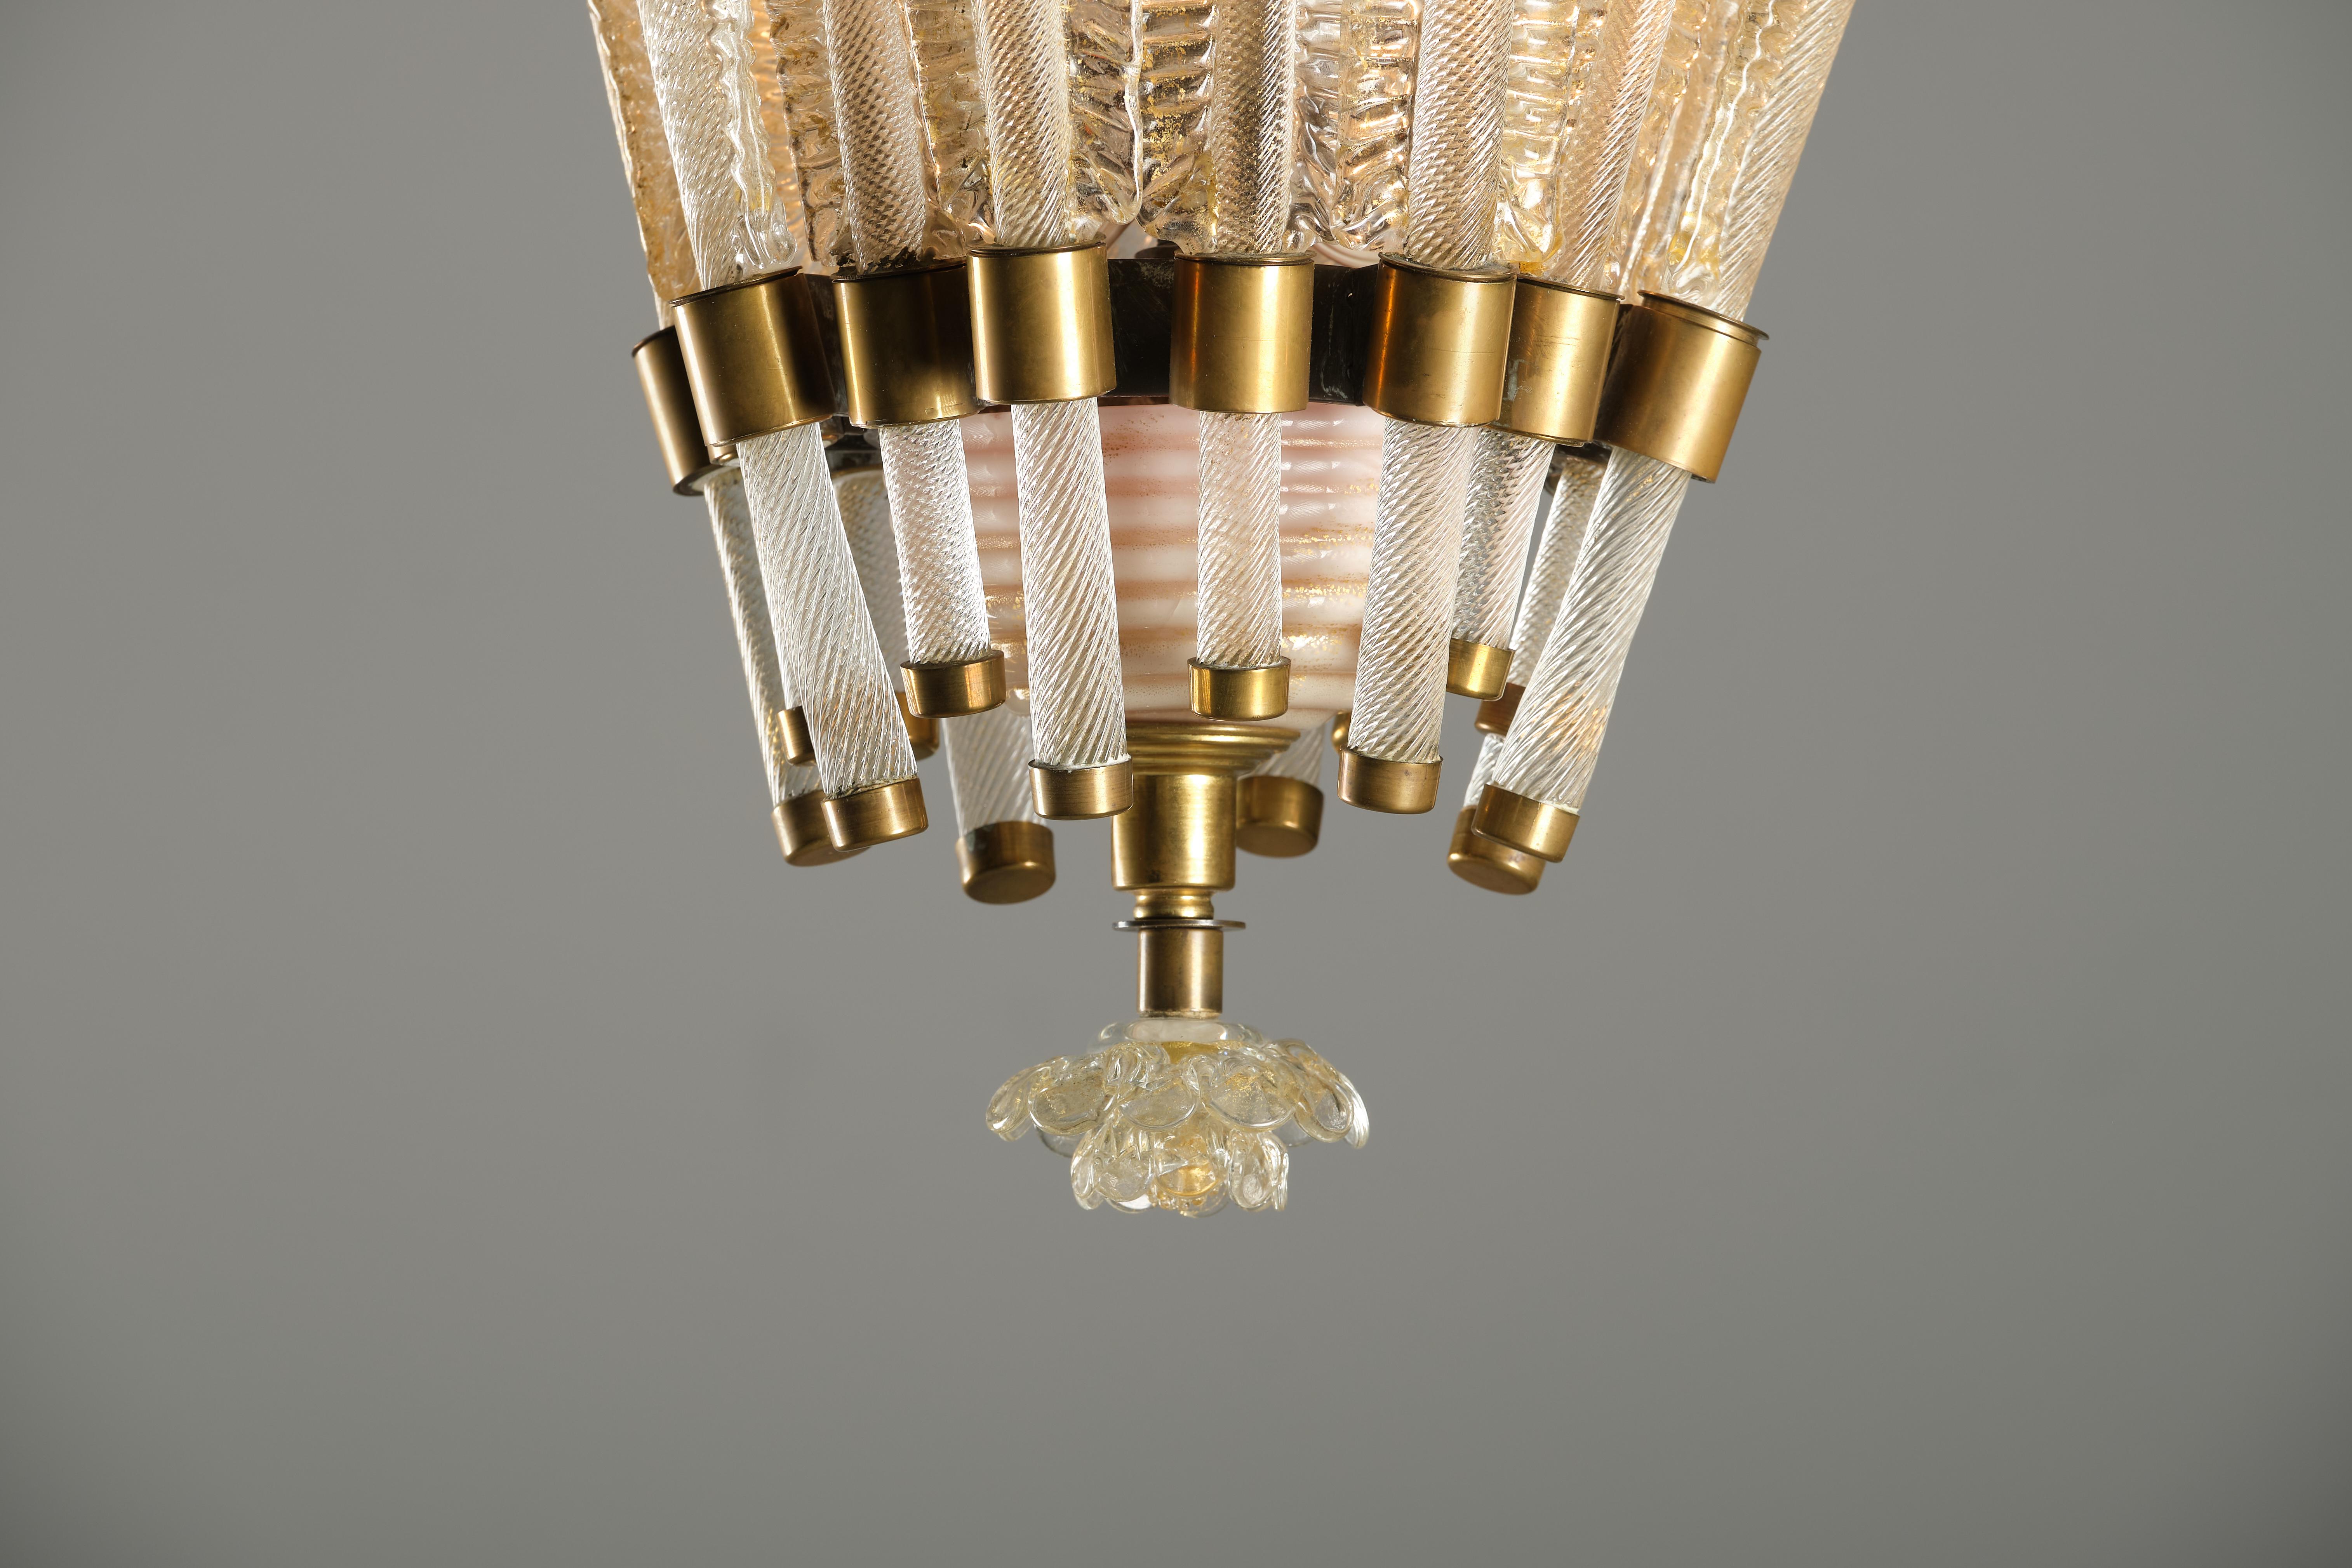 This beautiful chandelier was designed by Tomaso Buzzi for Venini in the 30s. The brass structure supports the decorative elements in transparent Murano glass and gold leaf, which alternate in two different sizes along the circular perimeter. A